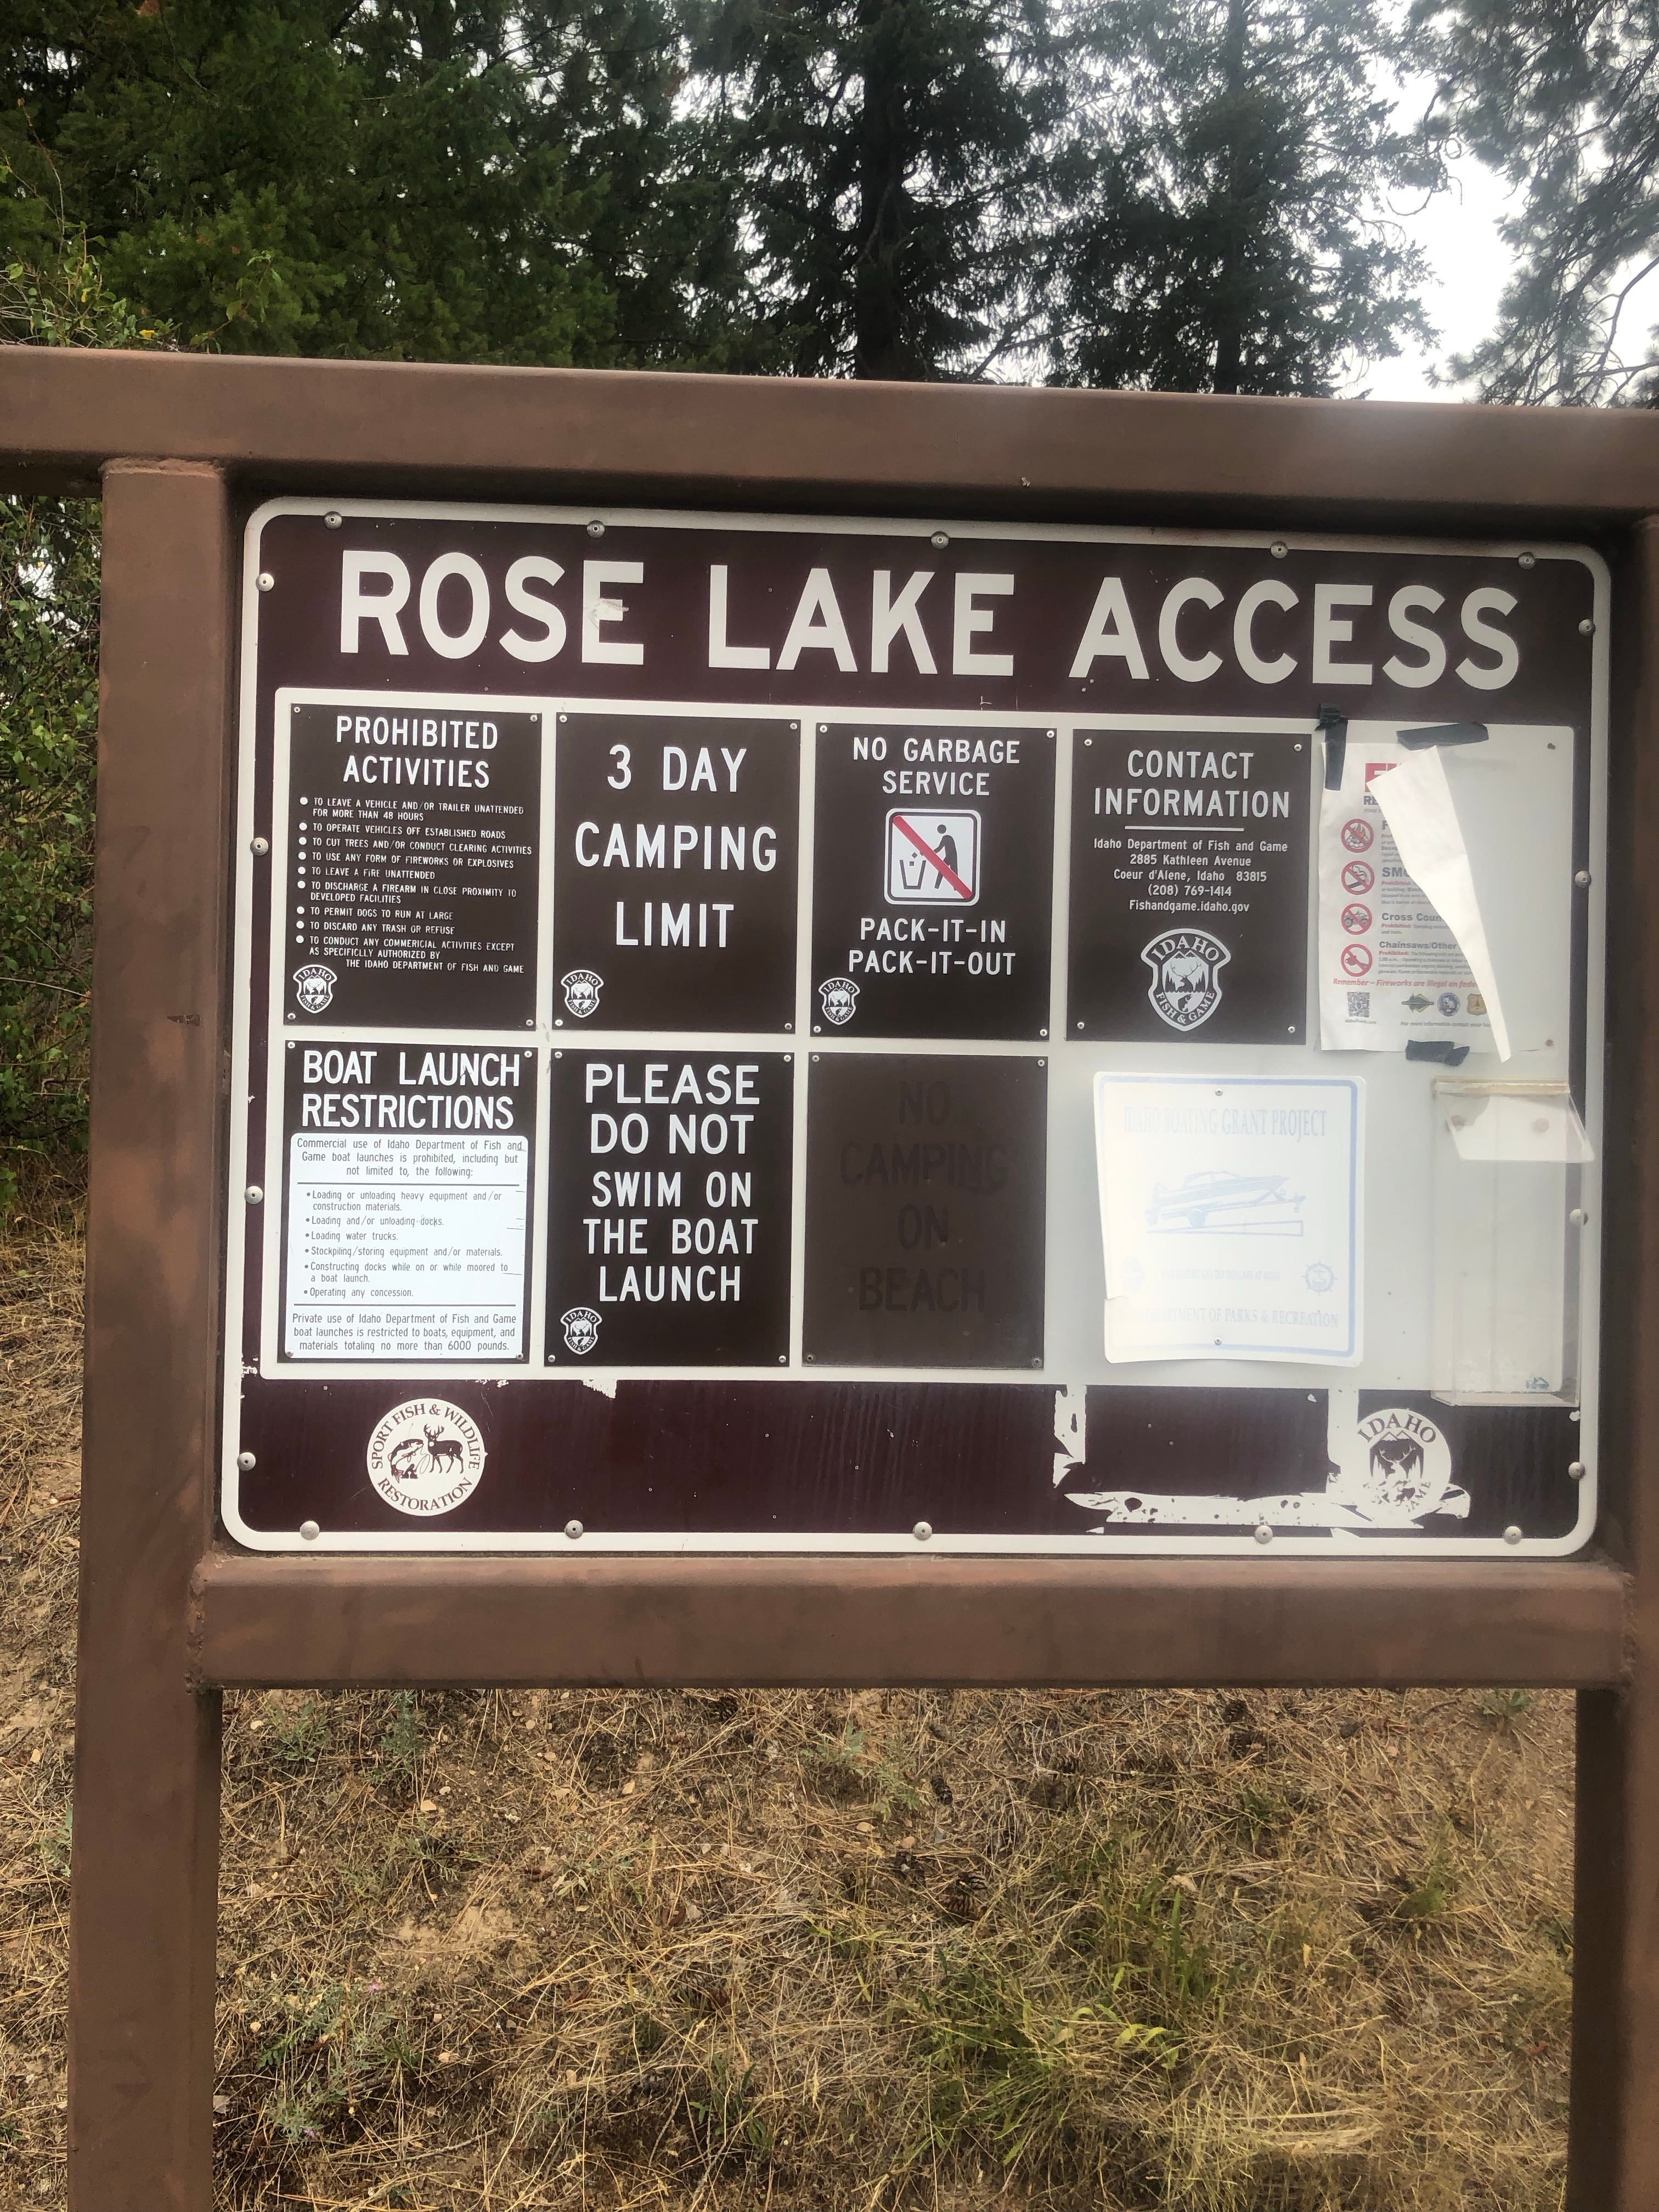 Camper submitted image from Rose Lake - 1